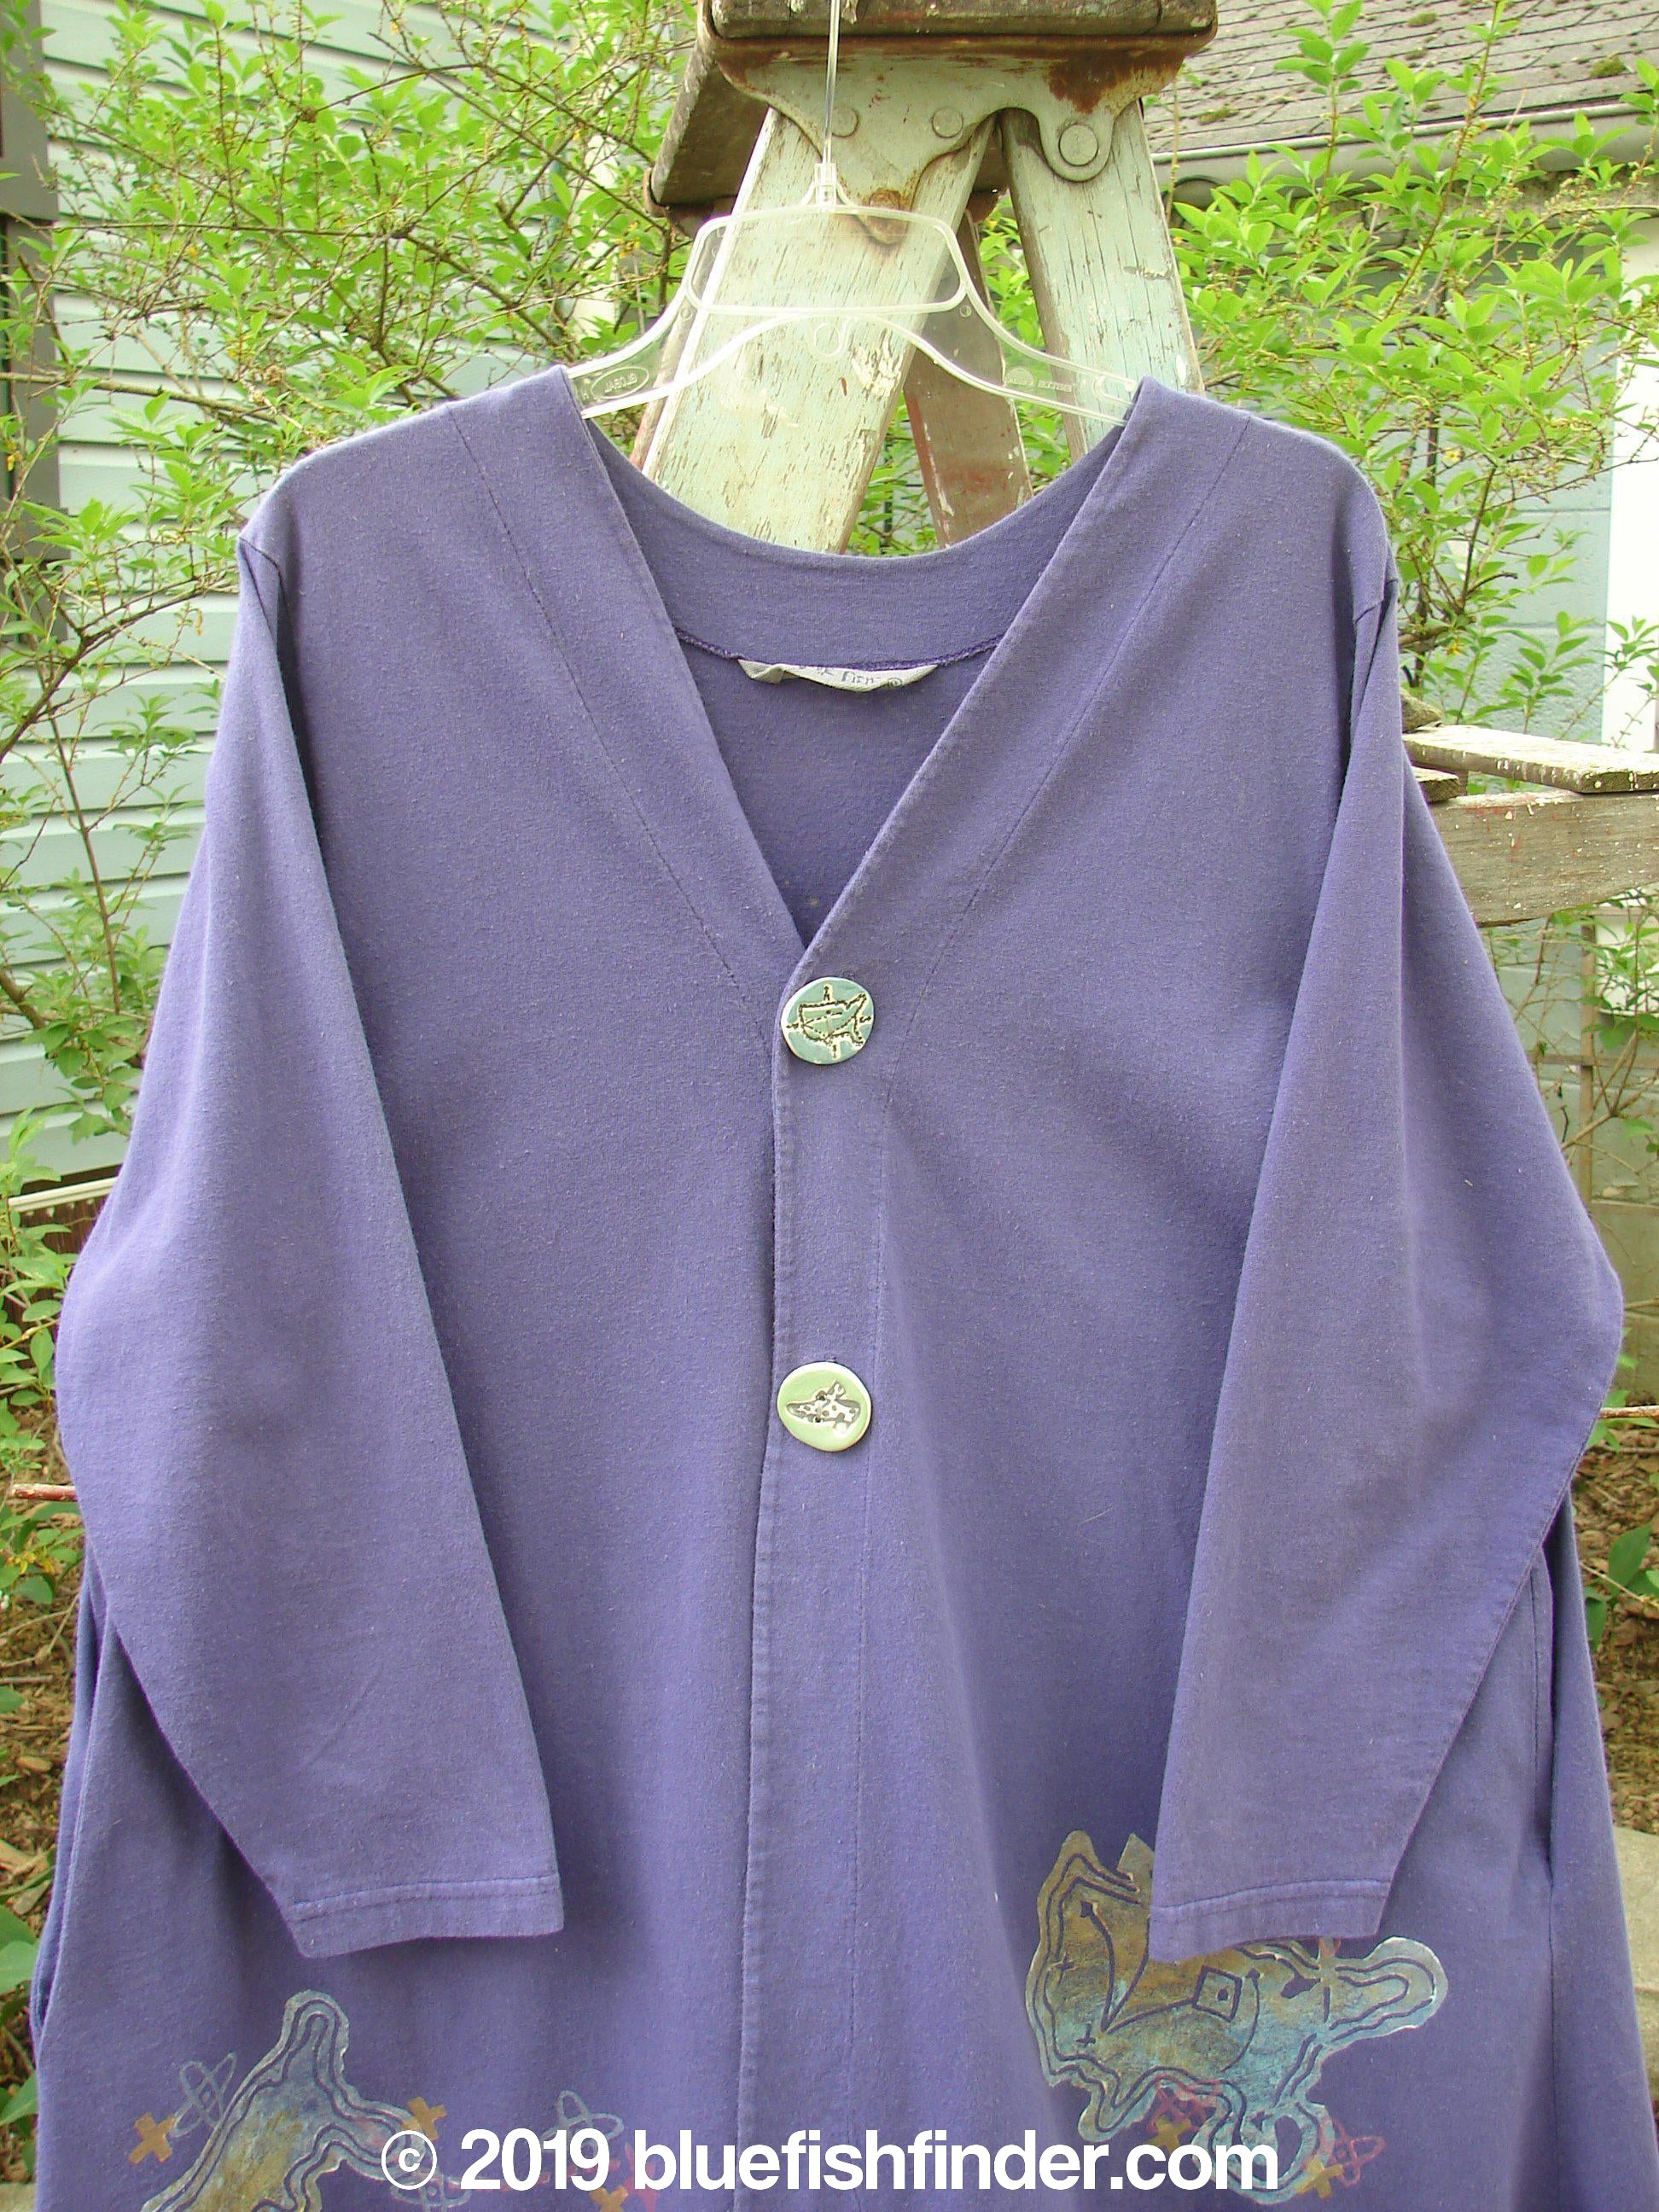 1996 Dining Car Jacket Travel Niagara Size 1: A purple shirt with buttons on a clothes rack. Features include a V-shaped neckline, artisan porcelain buttons, and deep side pockets.